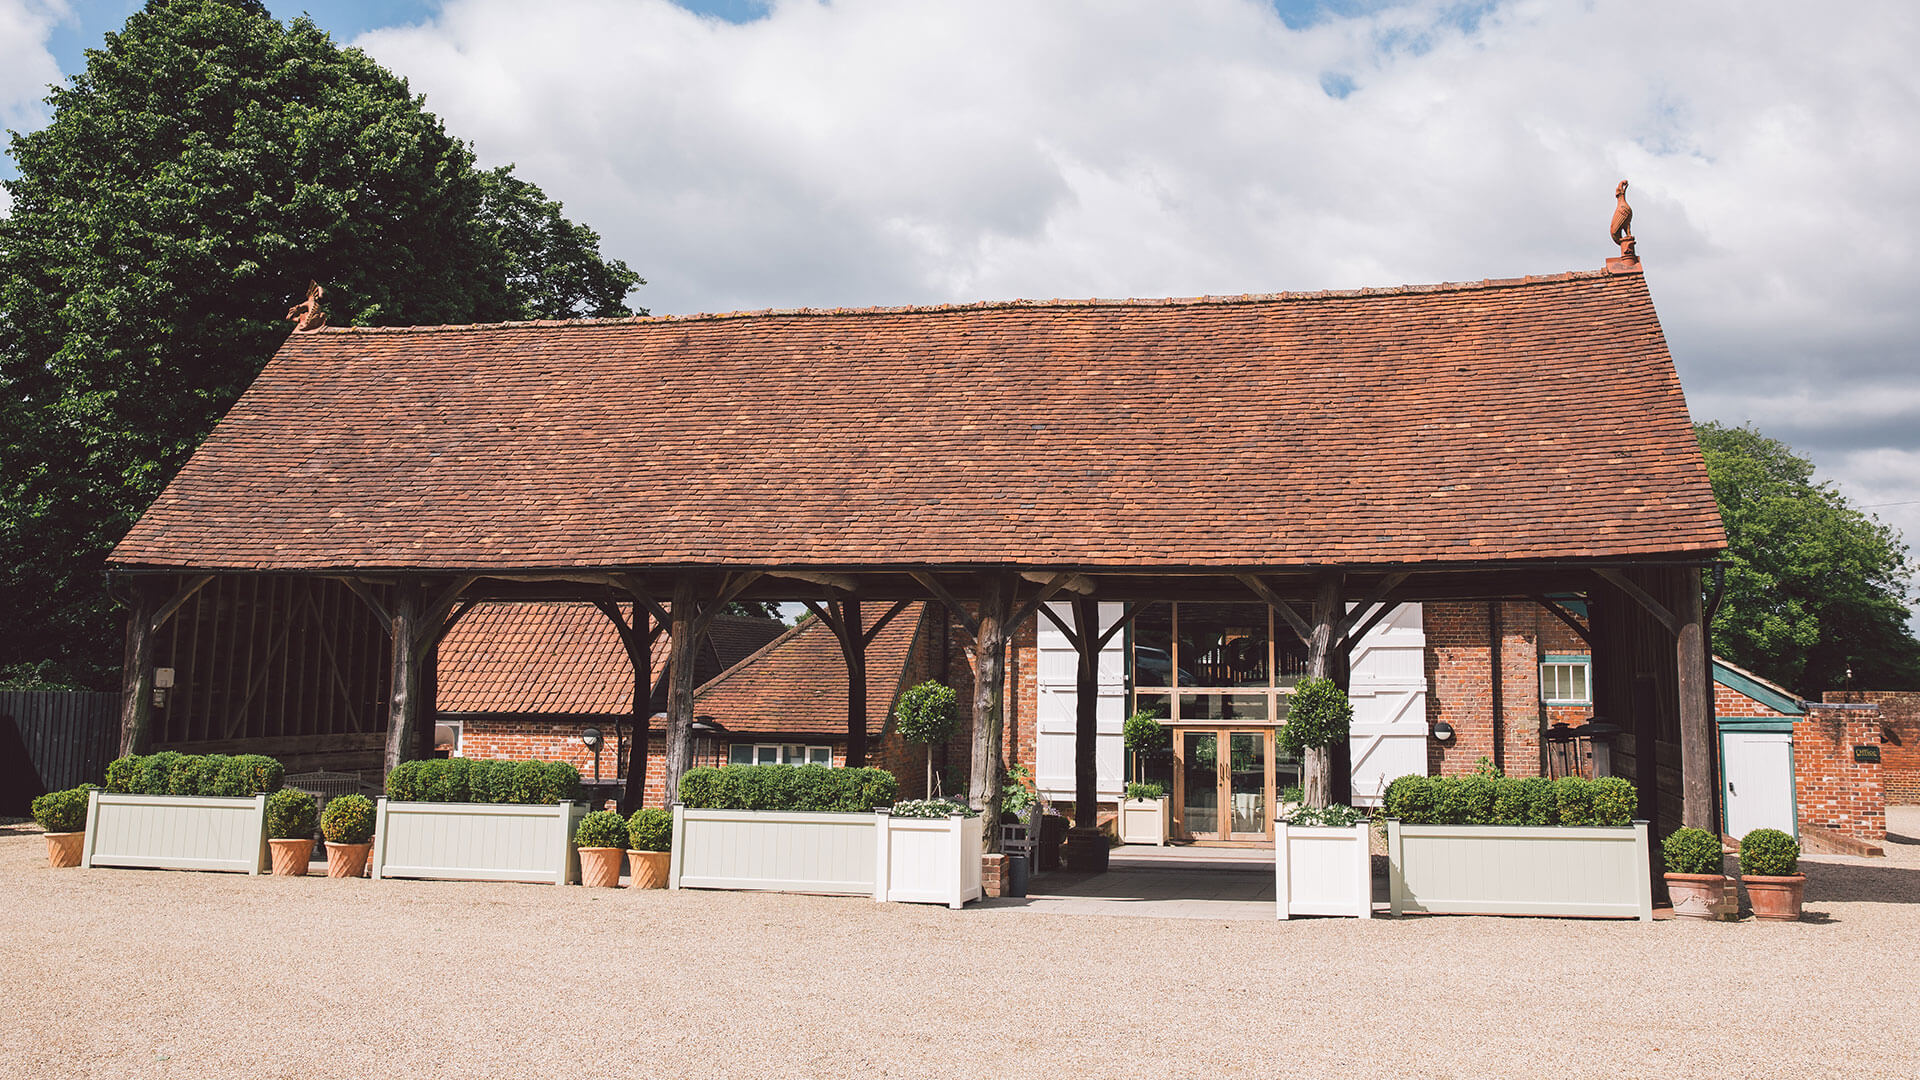 The Gather Barn is the perfect summer wedding venue with its open-air feel - summer wedding ideas